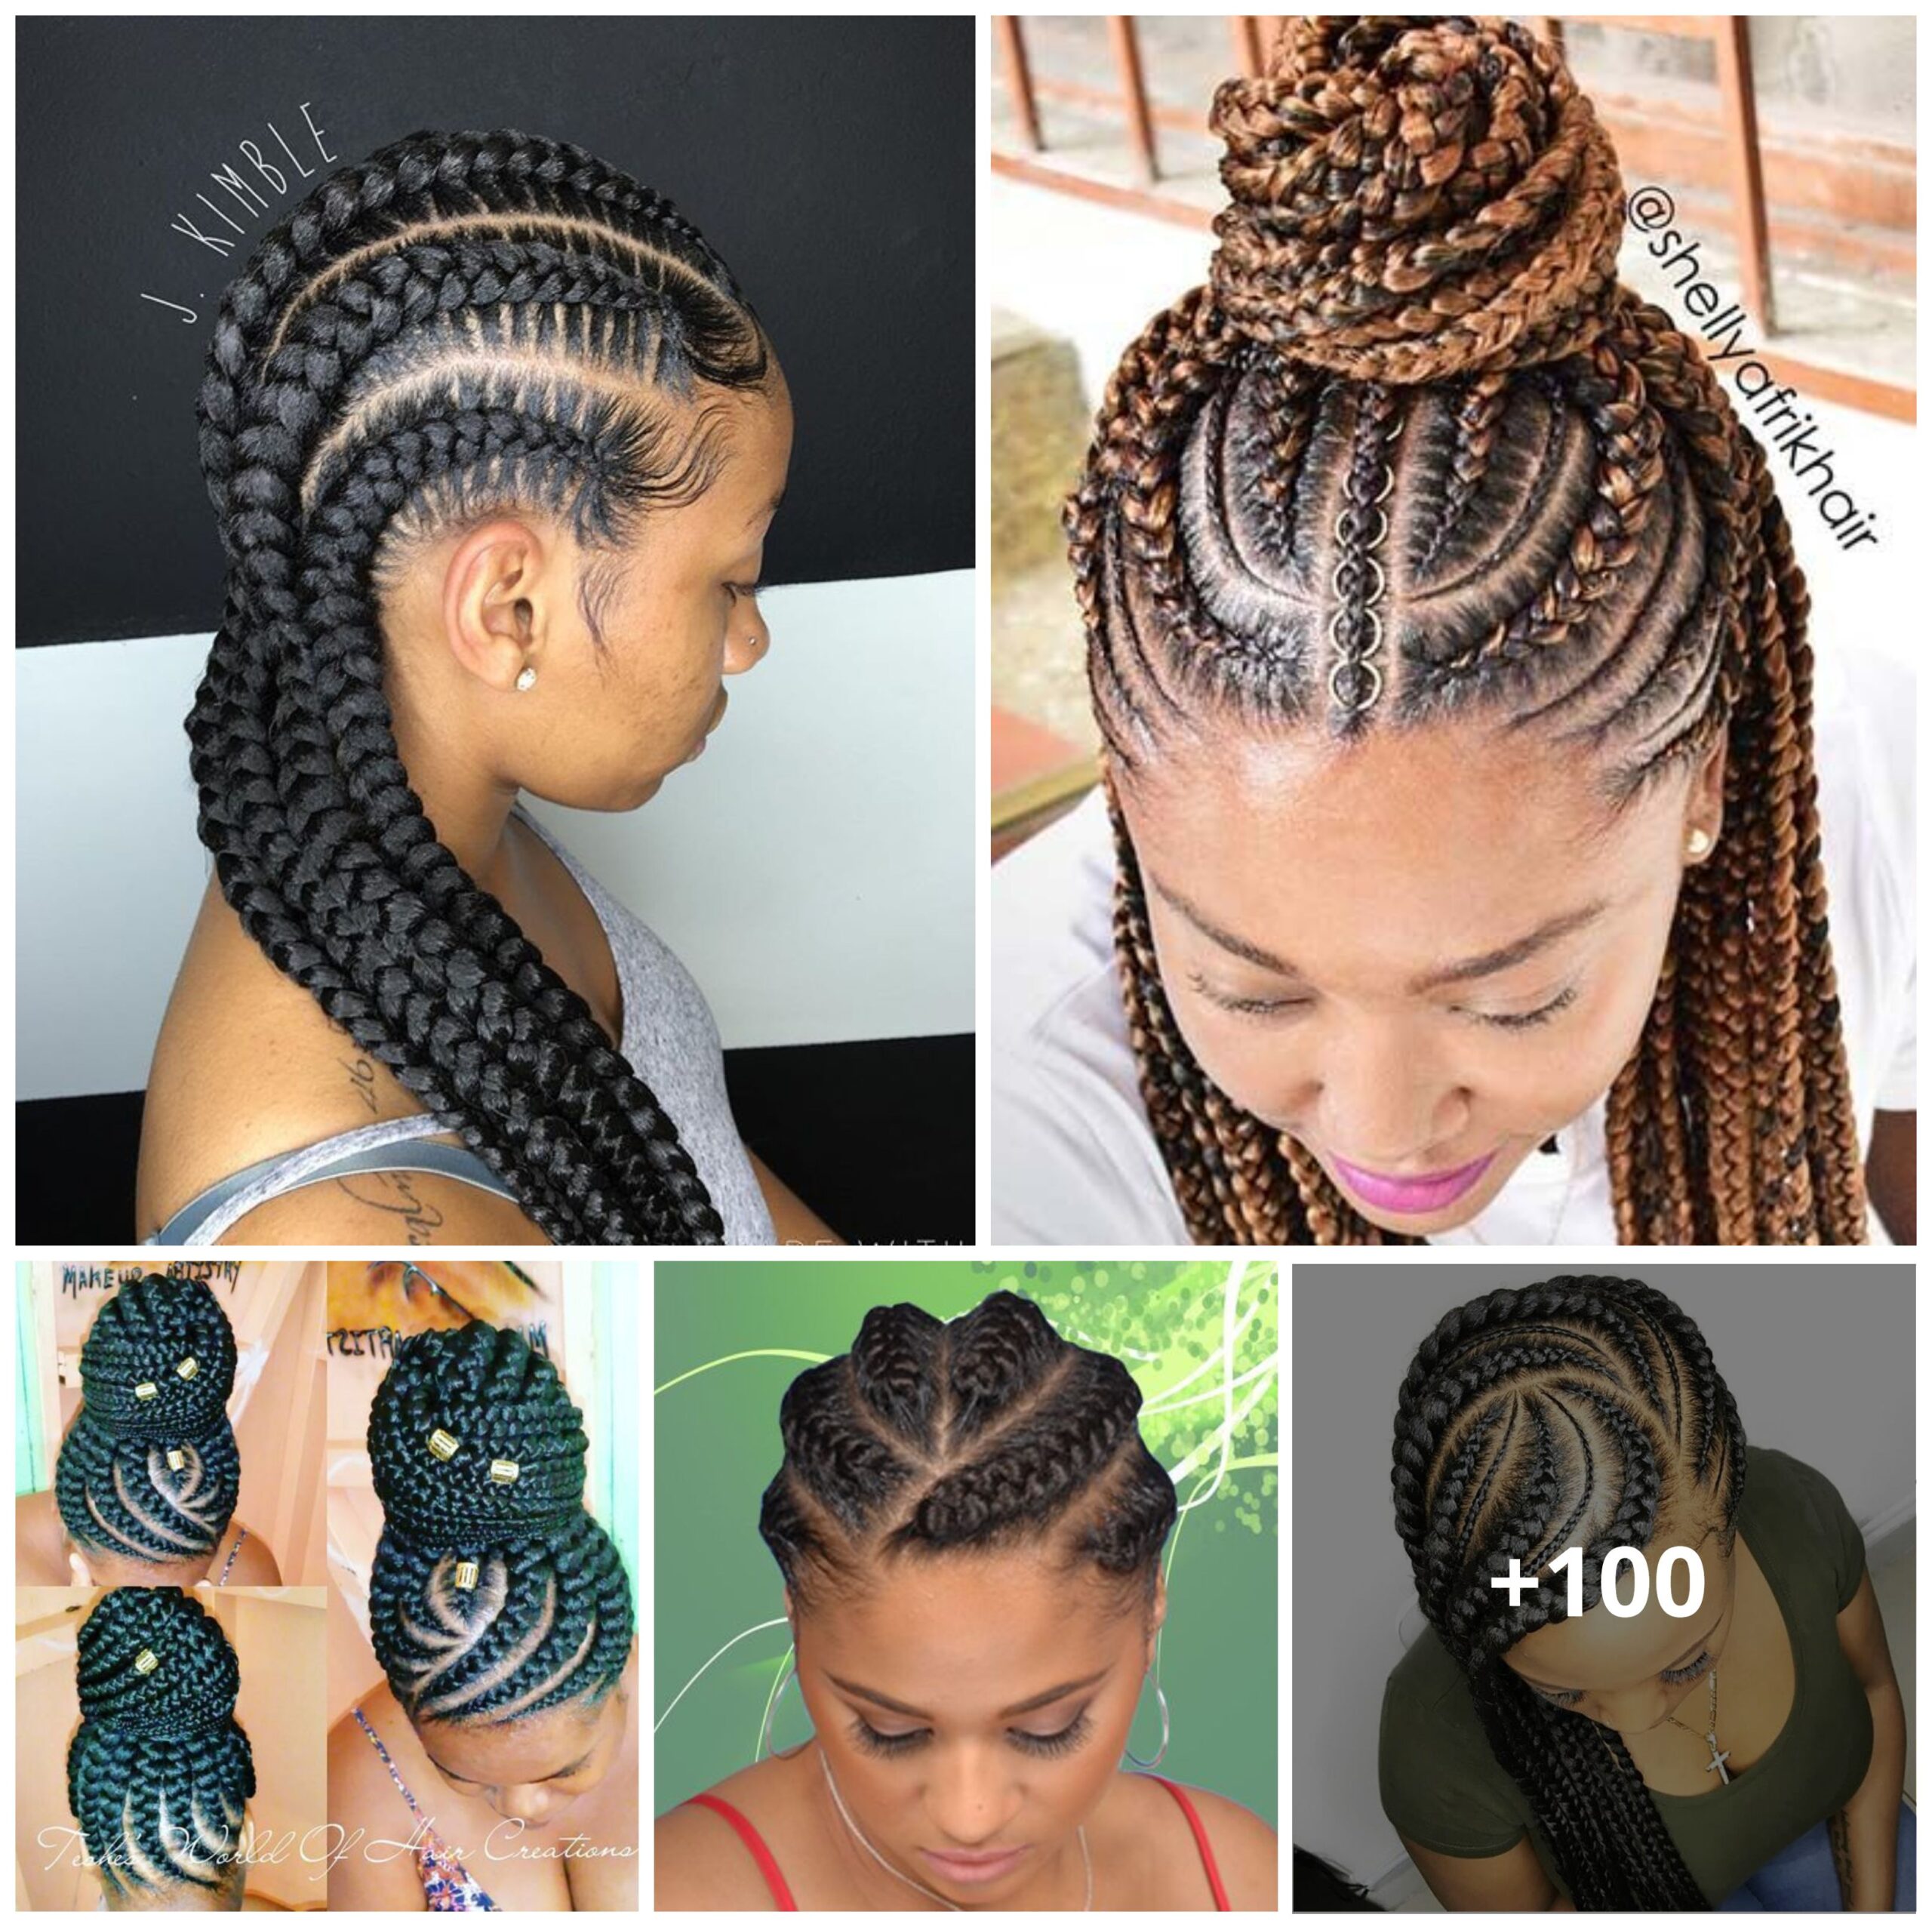 (Part 3) 100+ Photo Ghana Braids Kinds – A Should-See For Stylish Women